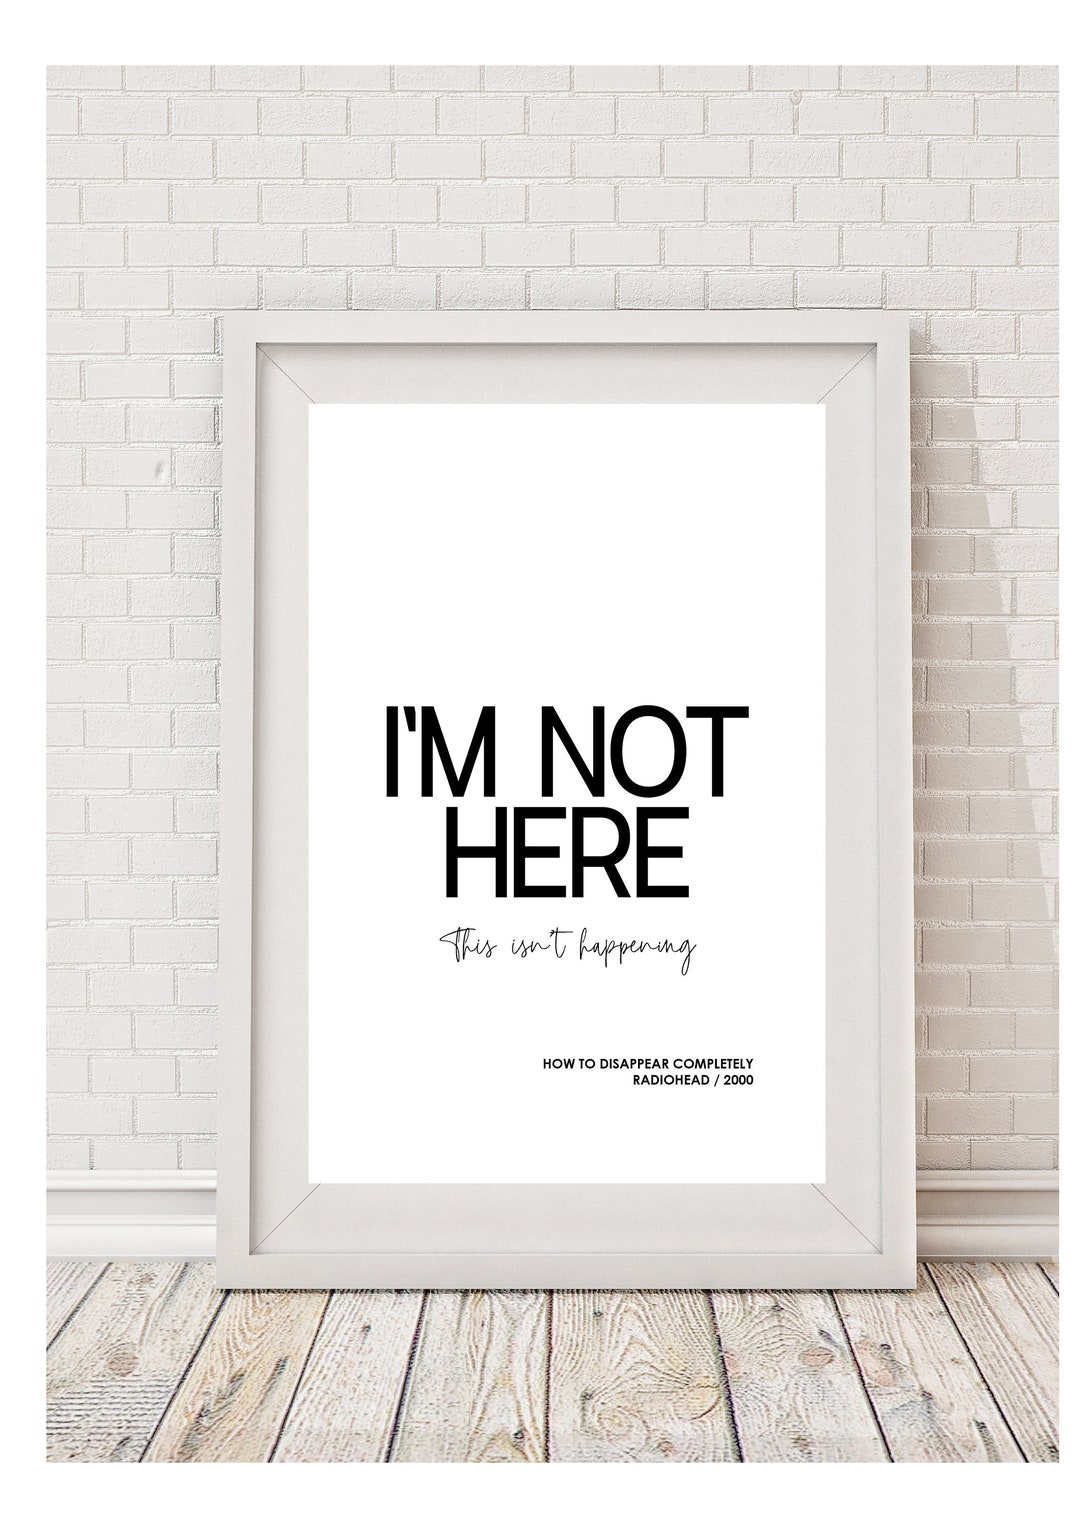 Radiohead Inspired Greeting Card and A4 Print With Lyrics From